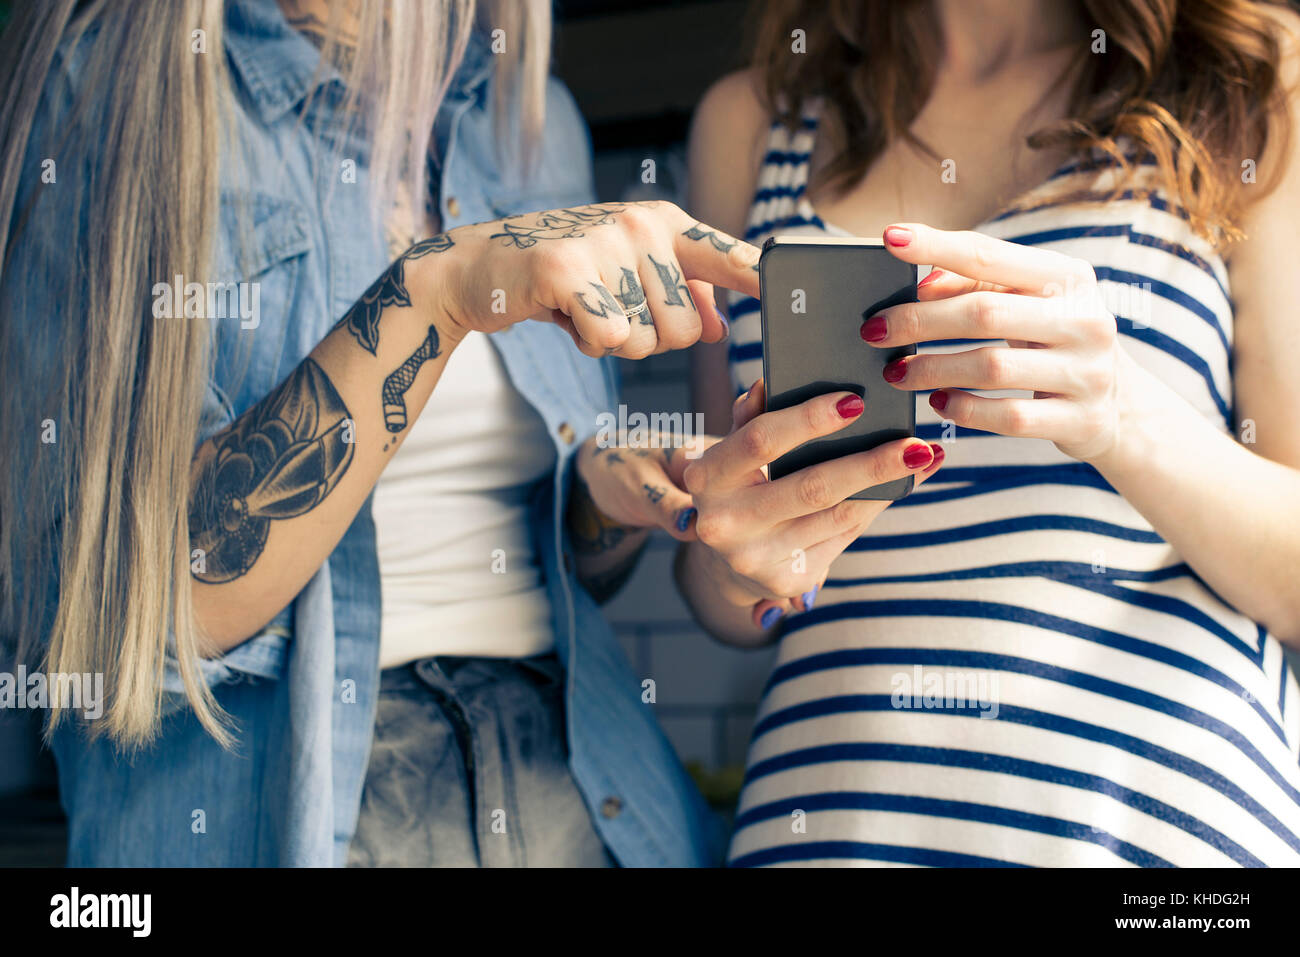 Women using smartphone together, cropped Stock Photo